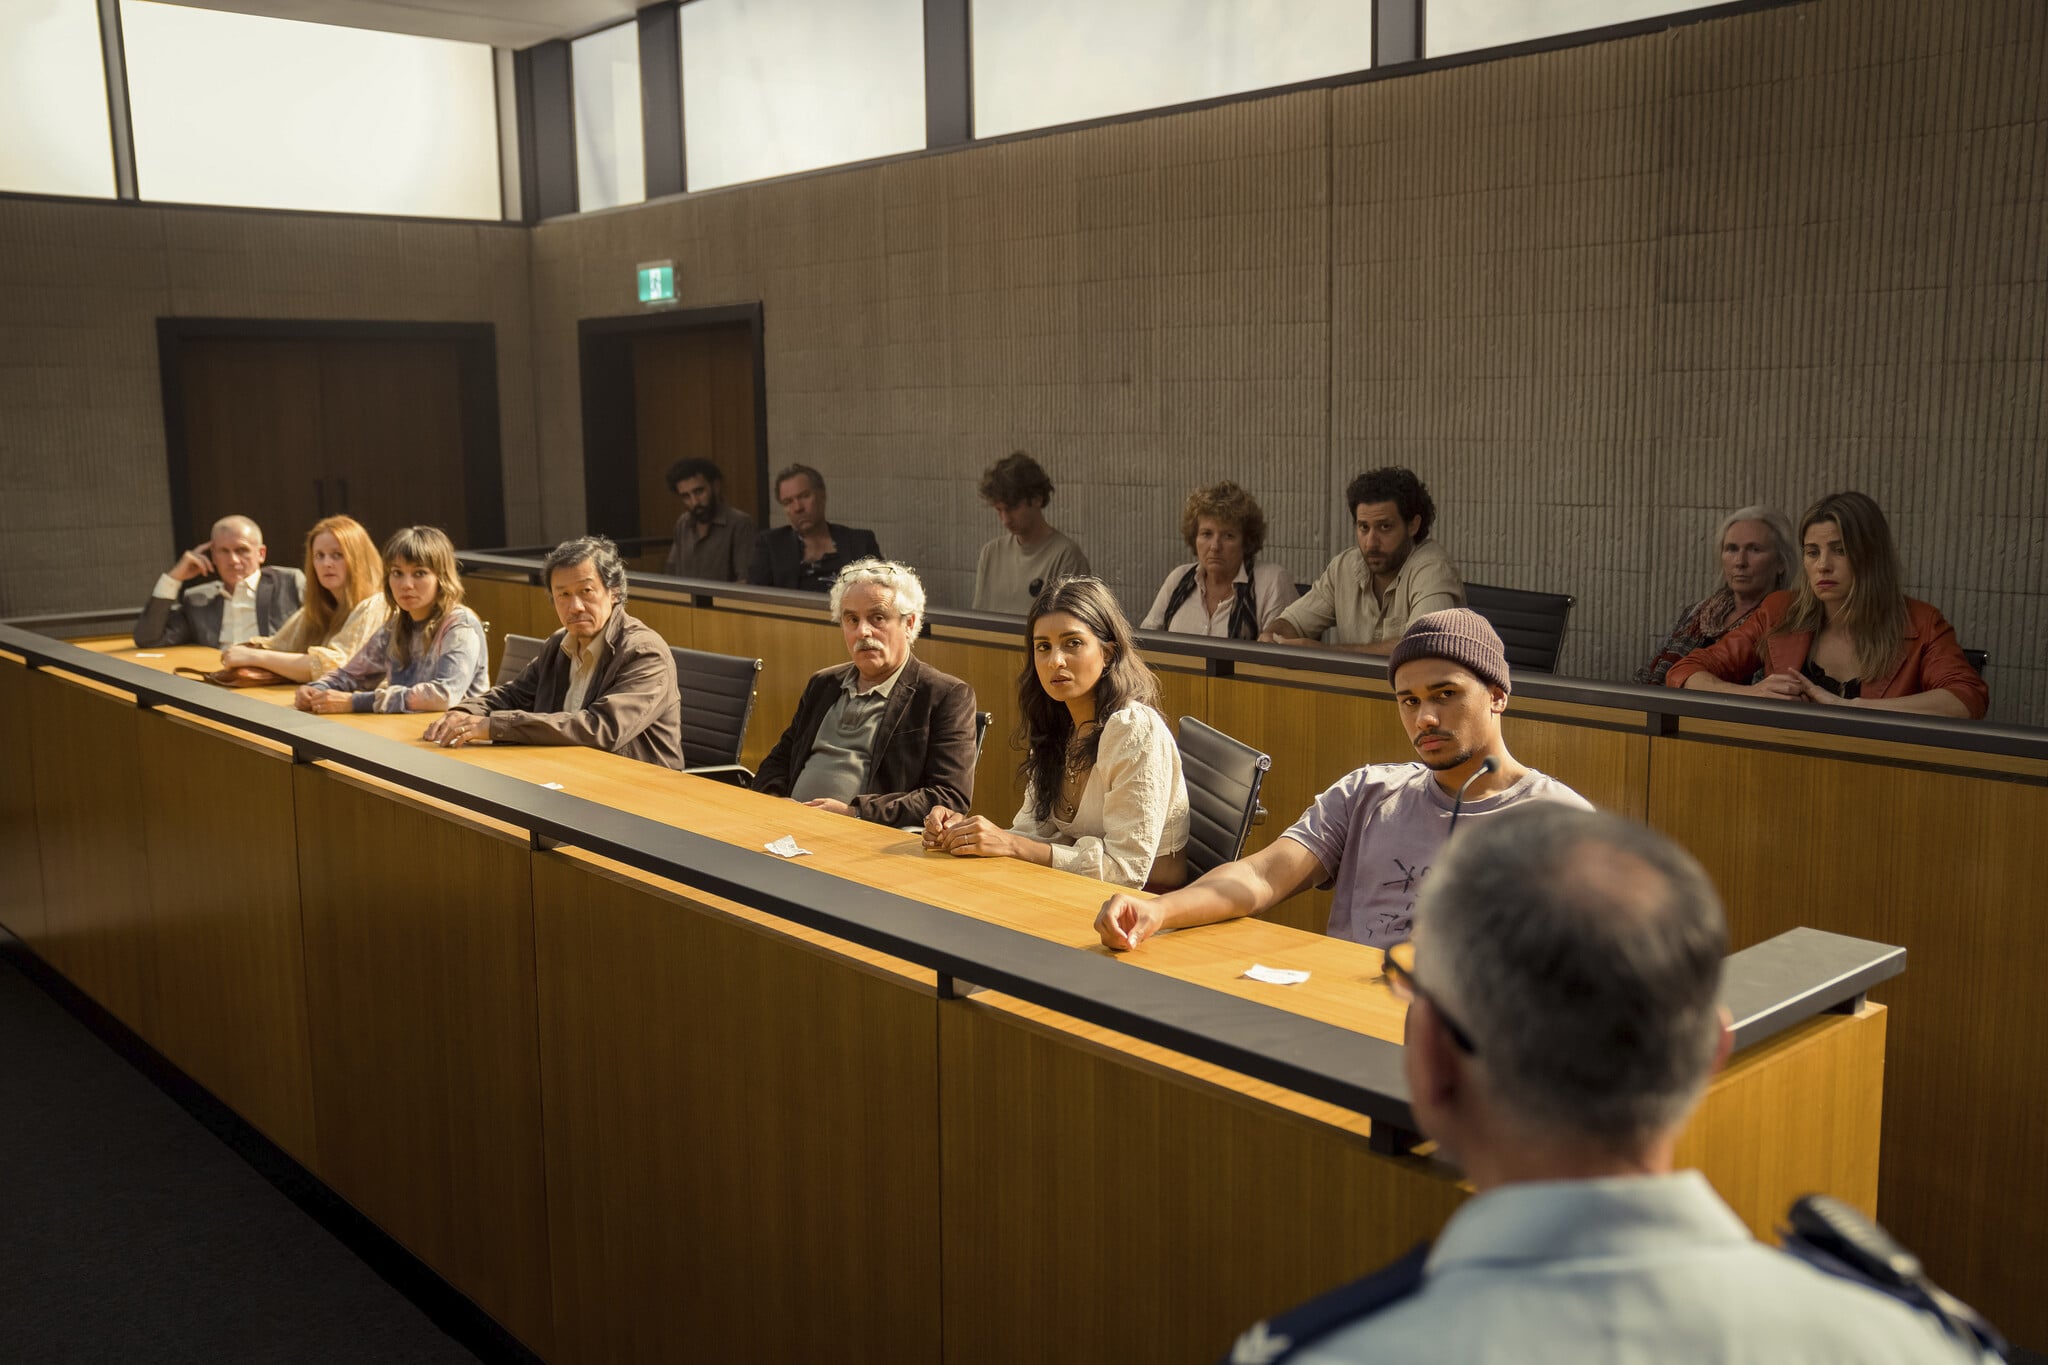 The Jury in THE TWELVE: (Back row L-R) Hazem Shammas as Farrad, Brendan Cowell as Garry, Toby Blome as Number 8, Gennie Nevinson as Margaret, Damien Strouthos as Alexi,  Susan Kennedy as Mel, Brooke Satchwell as Georgina. (Front row L-R) Nic Cassim as Simon, Bishanyia Vincent as Lily, Catherine Van-Davies as Vanessa, Warren Lee as Trevor, Daniel Mitchell as Peter, Pallavi Sharda as Corrie, Ngali Shaw as Jarrod (image - Brook Rushton)